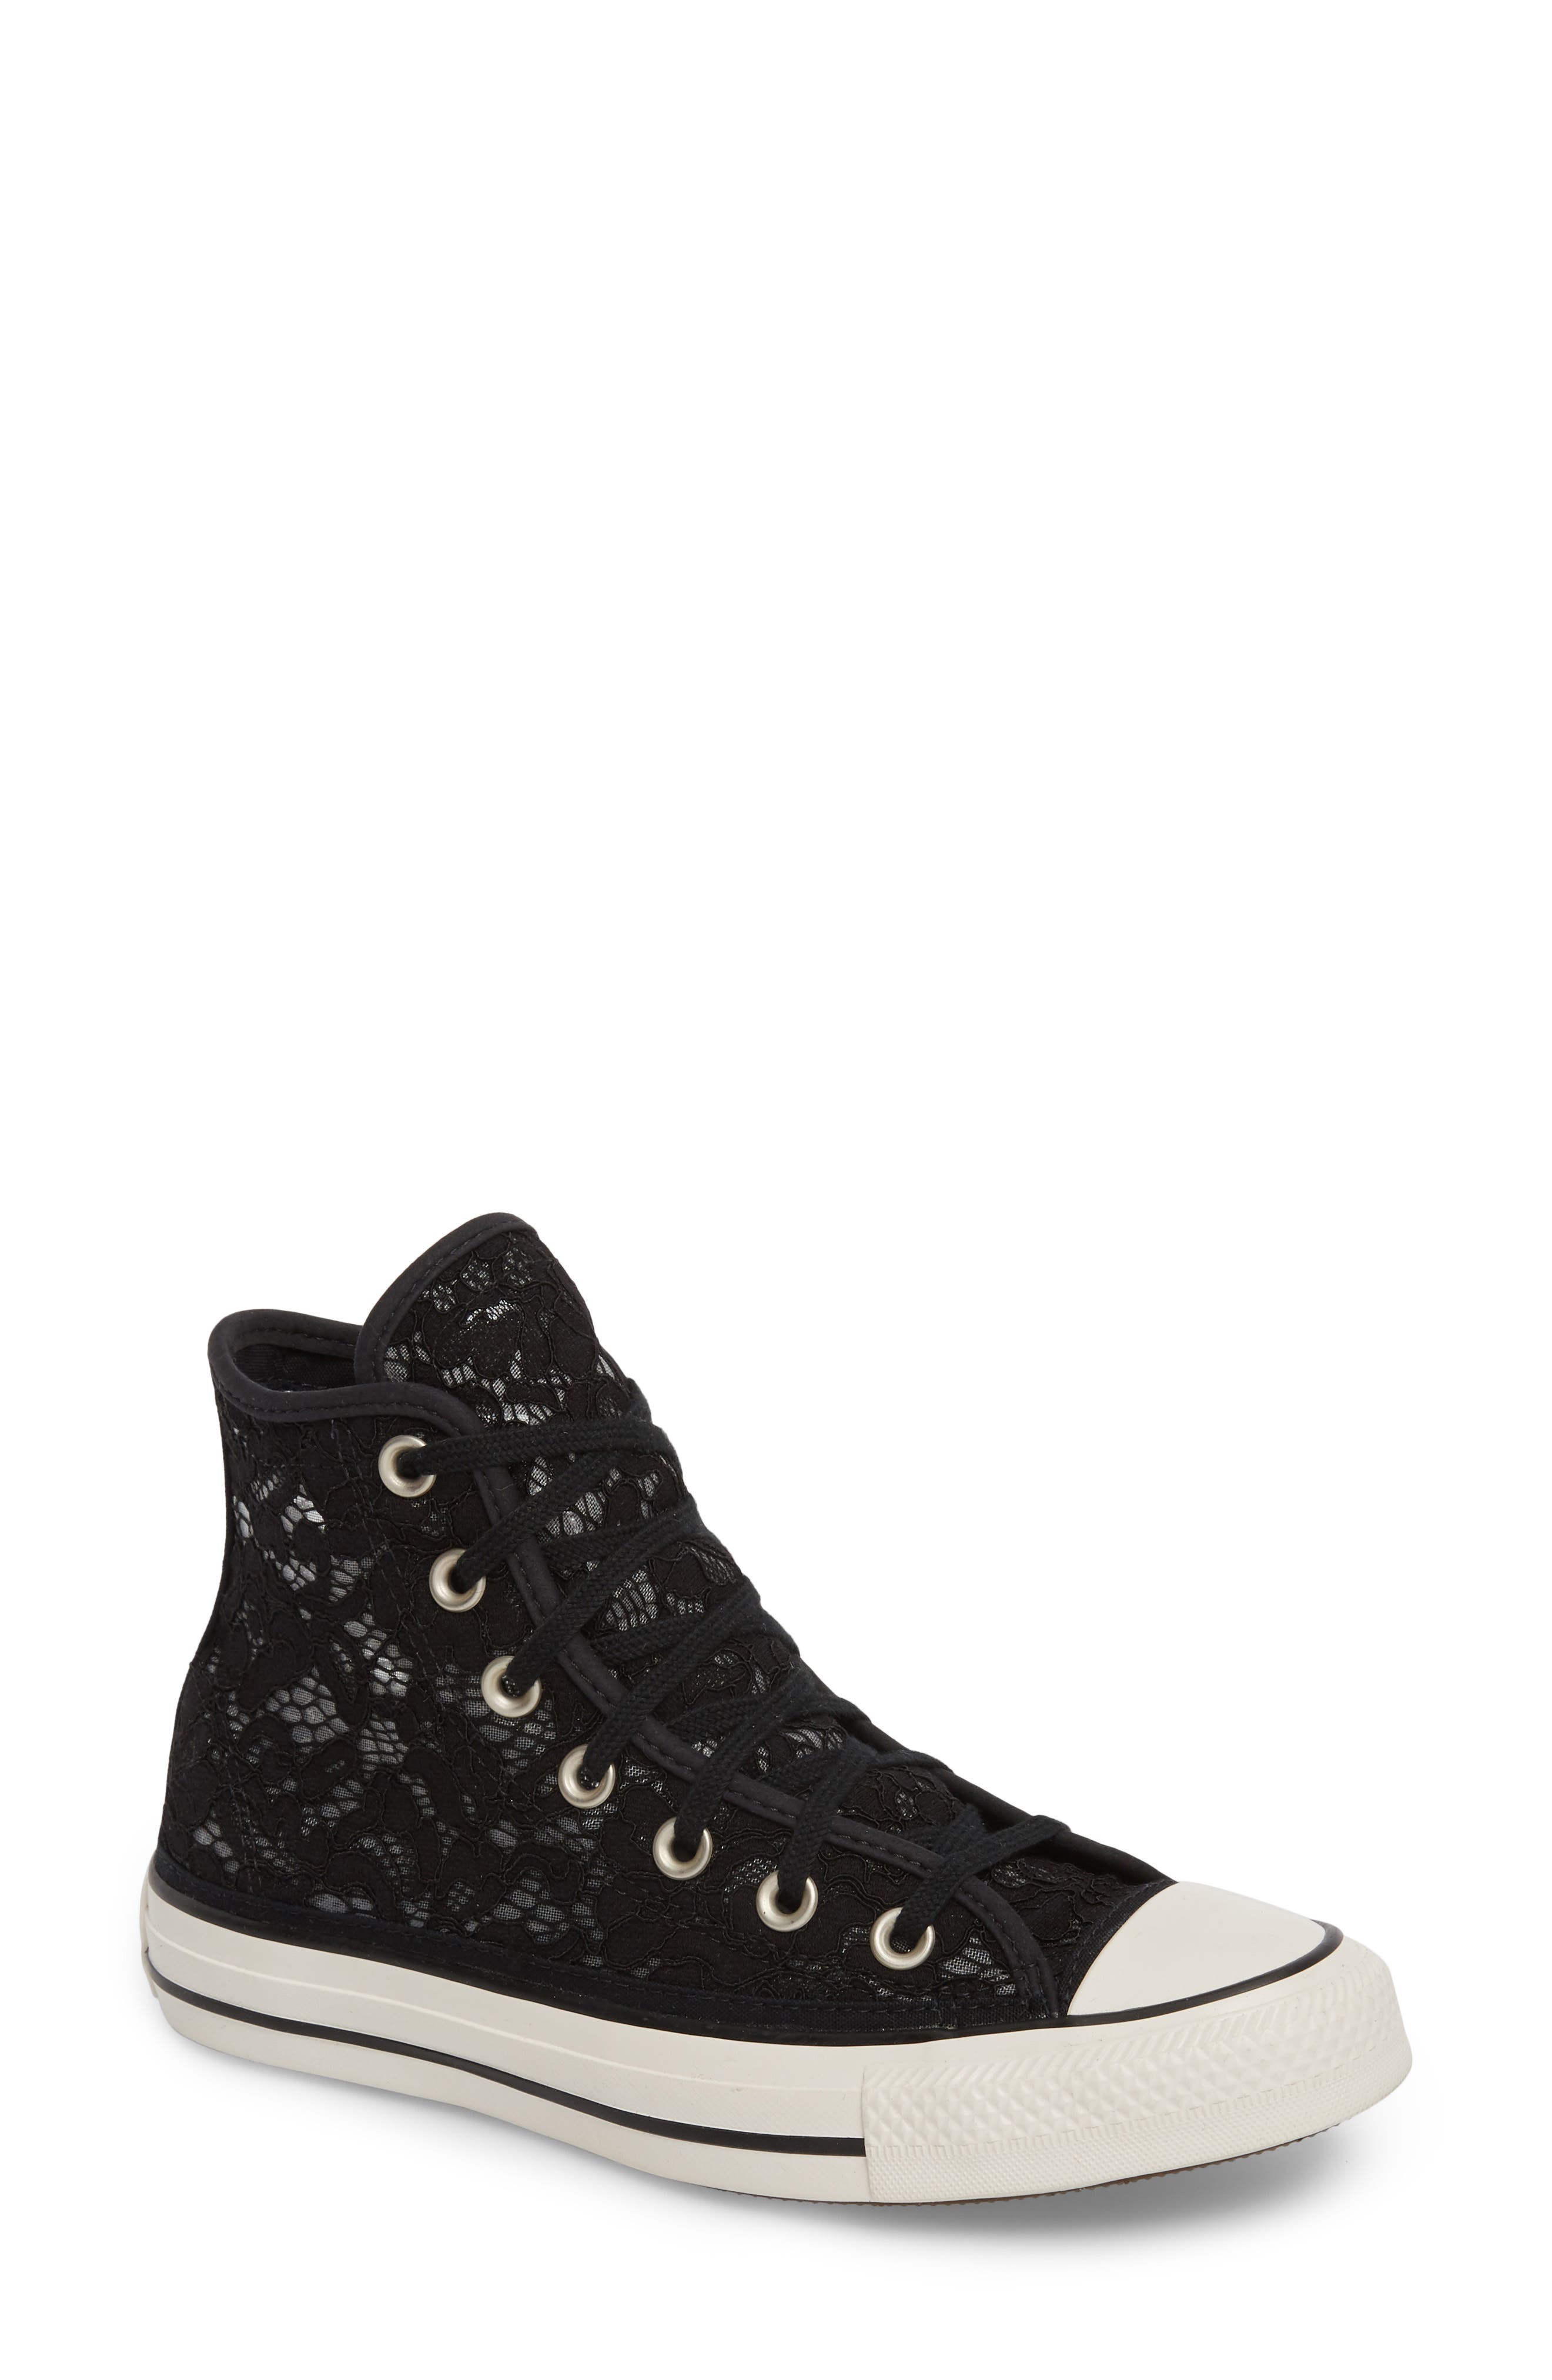 how do you lace converse high tops